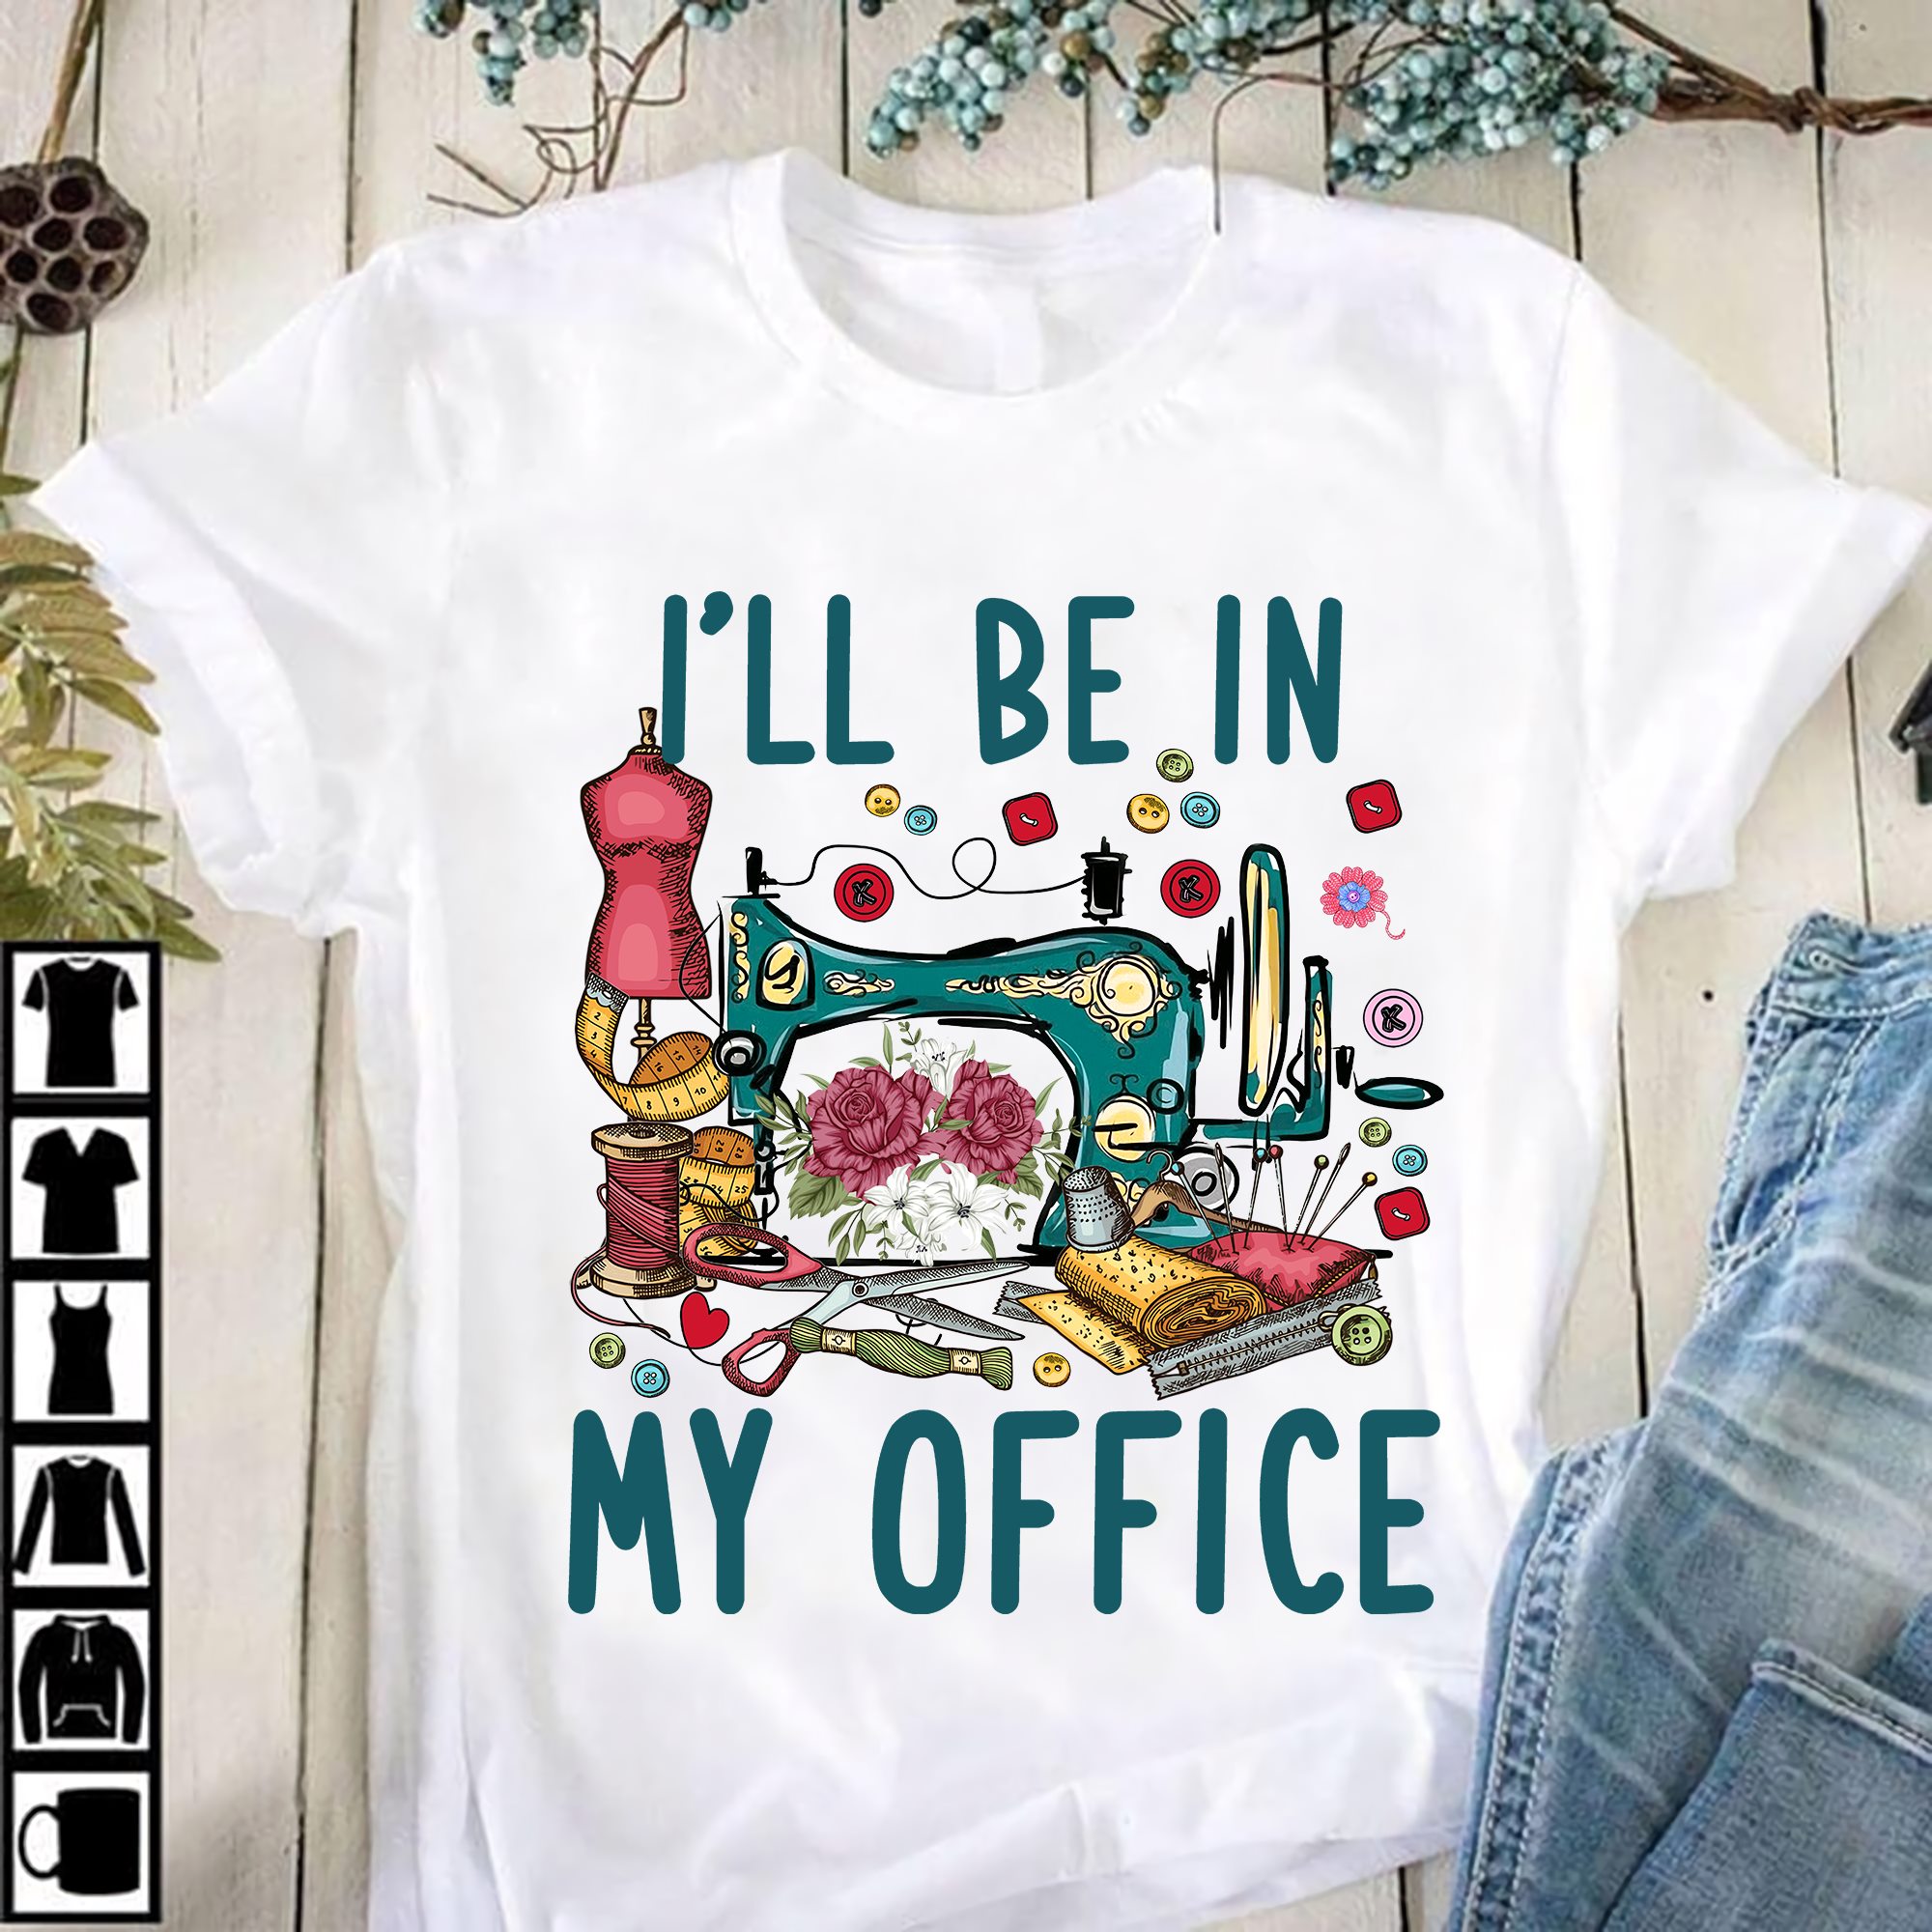 I'll be in my office - Sewing machine